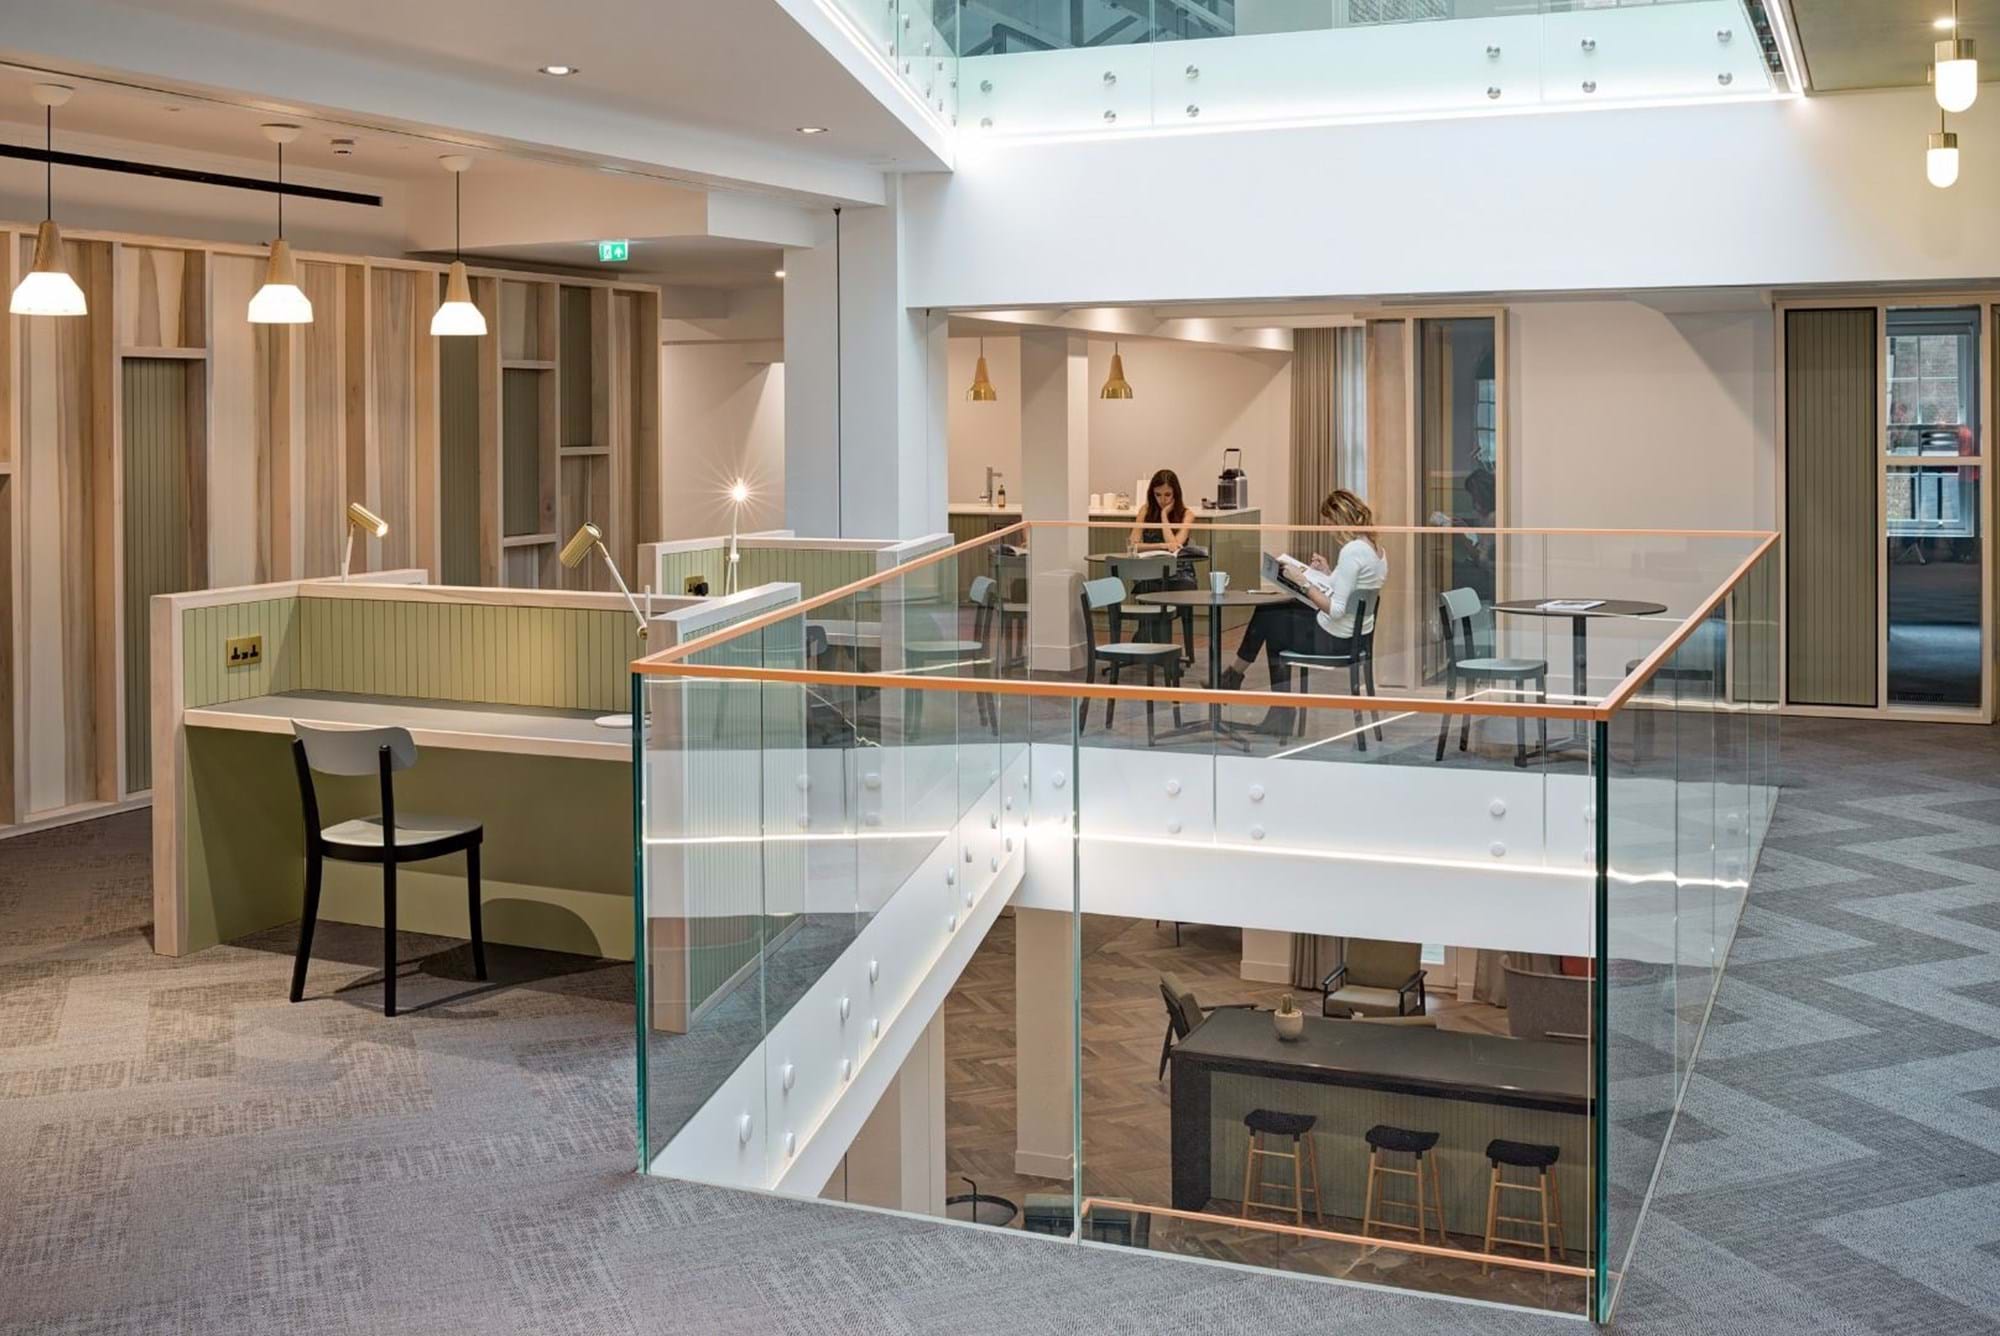 Modus Workspace office design, fit out and refurbishment - TOG - Wimpole Street - TOG Wimpole St 16 highres sRGB.jpg